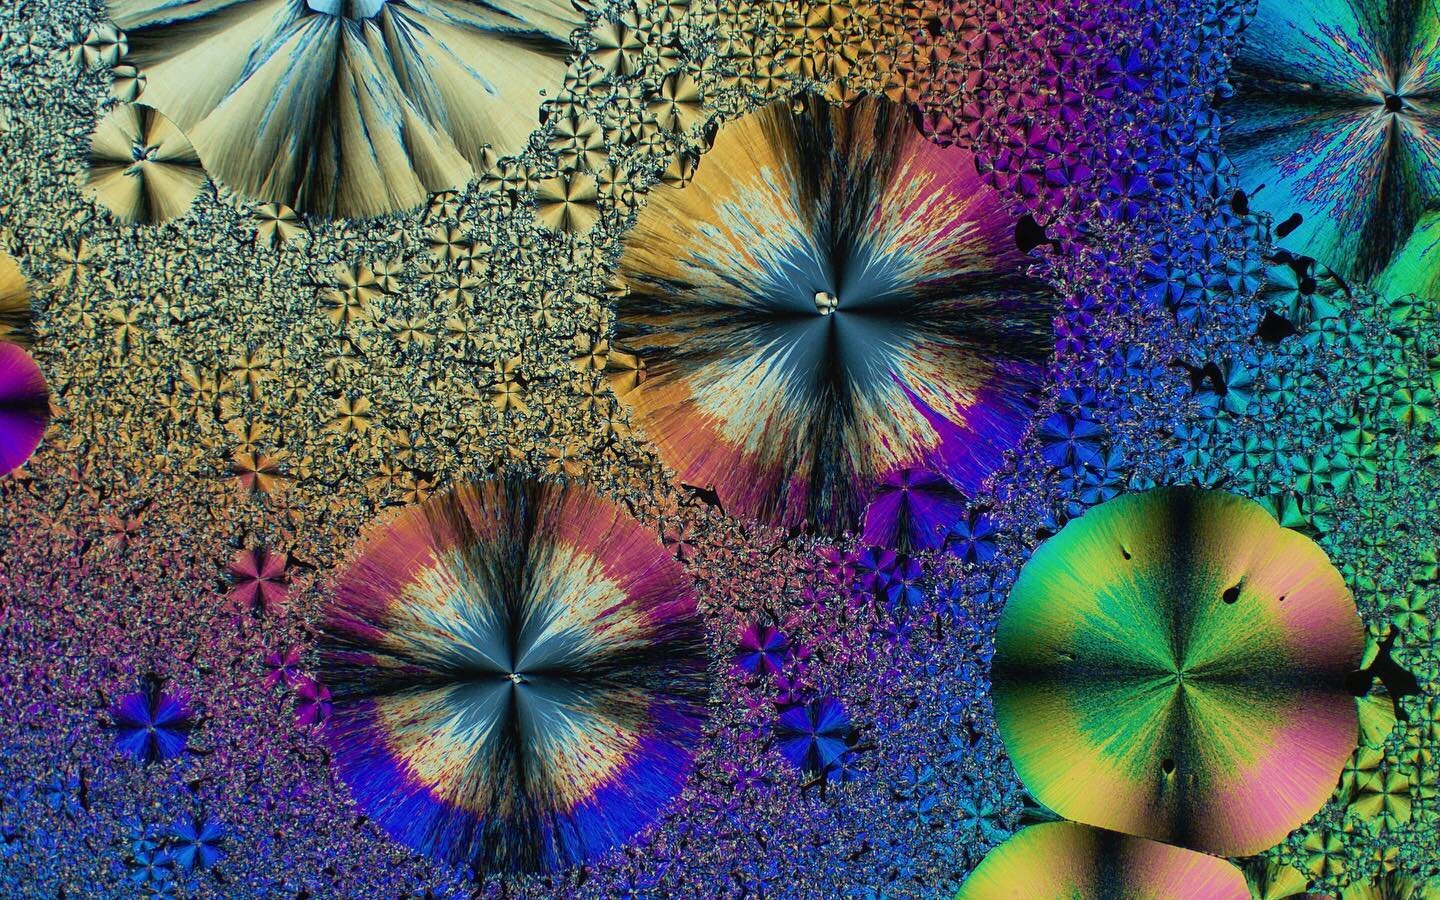 Sharing some simply beautiful work by @khariman08:
Hi! My name is Noalle, and I am a Chemistry PhD candidate at the @nyuniversity Molecular Design Institute. I use optical (visible light) microscopes to study the wonderful world of molecular crystals